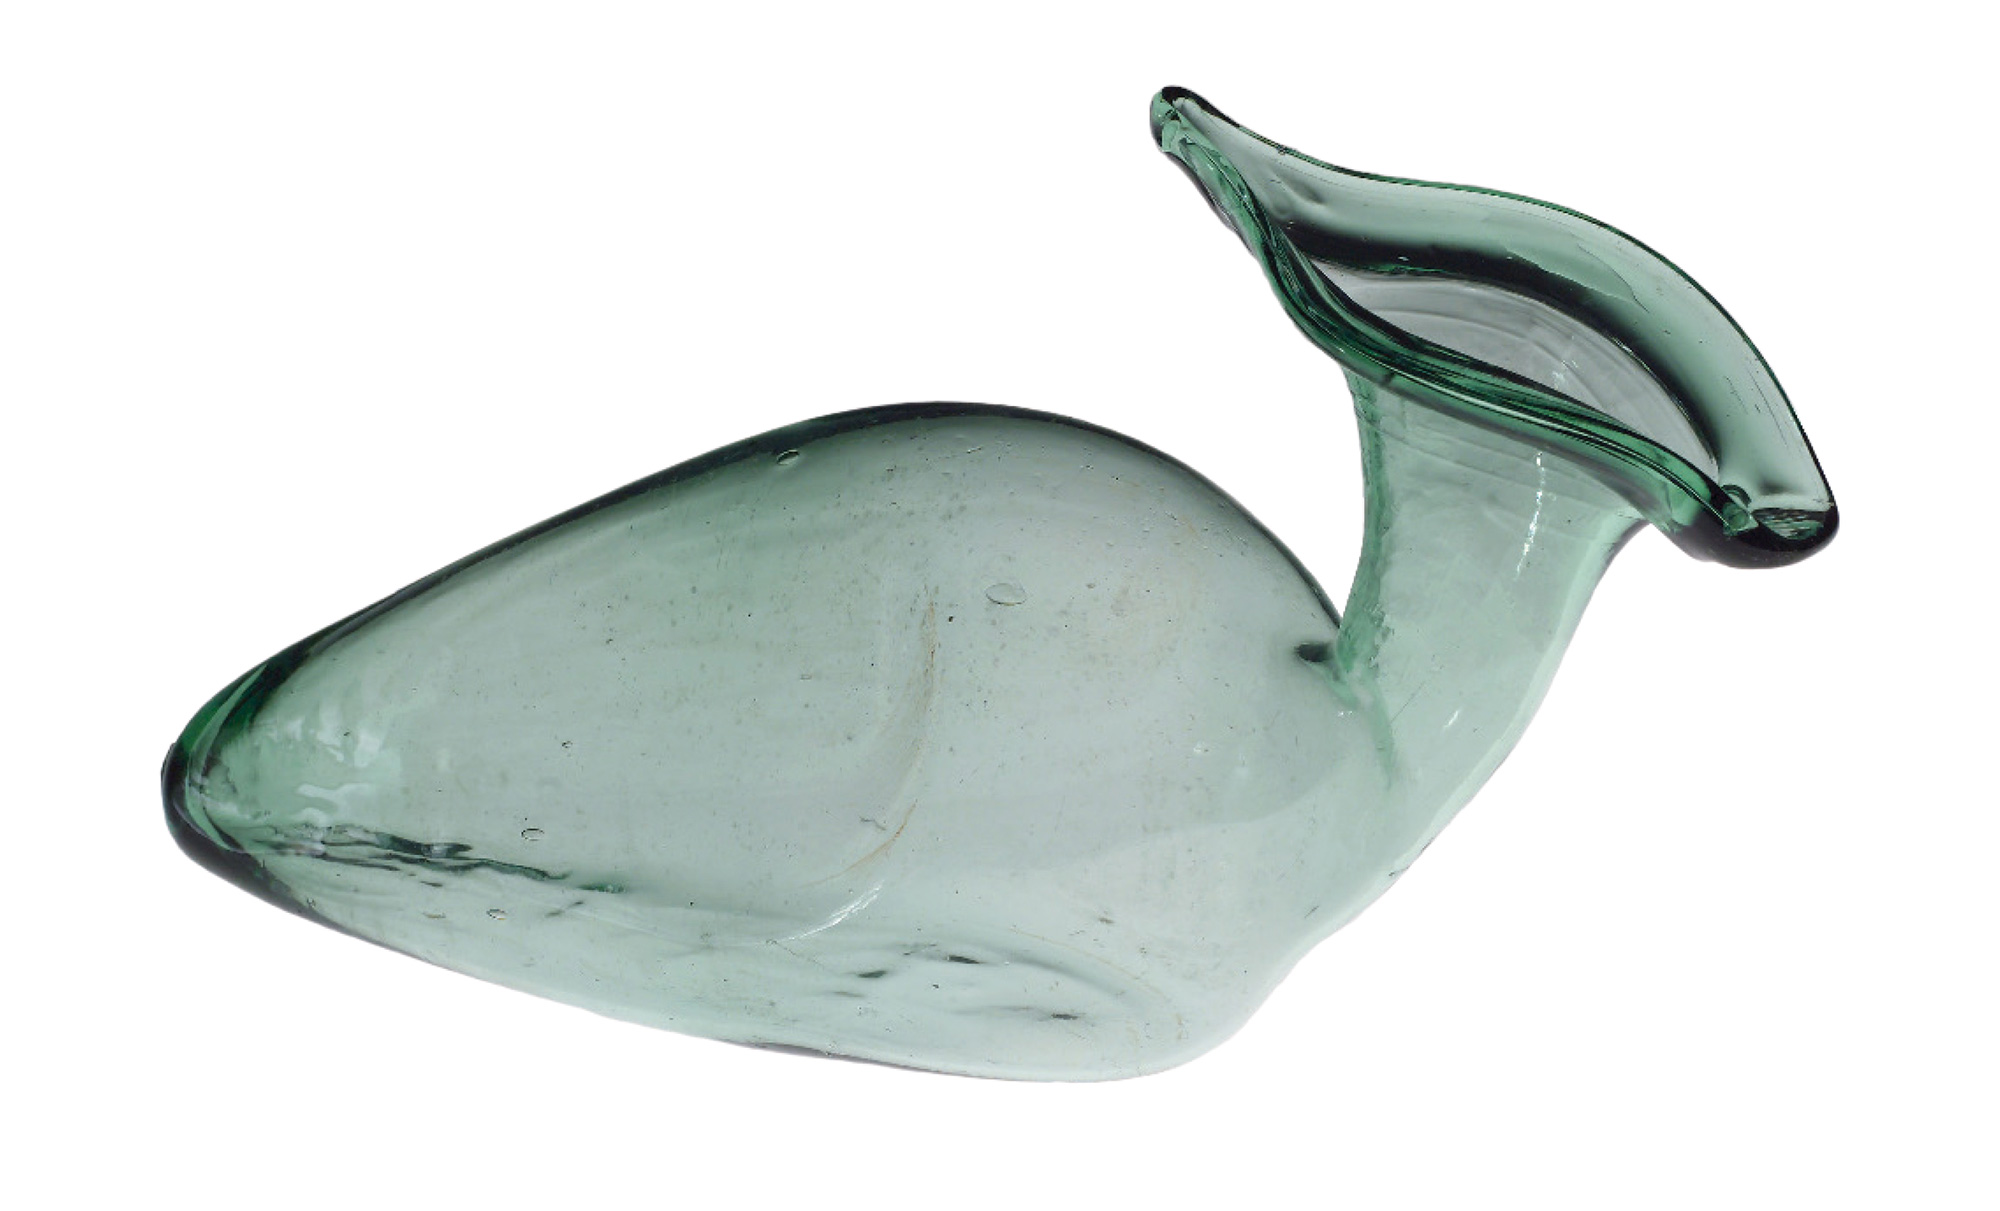 A photograph of a glass female urinal from circa 1701 to 1740. 